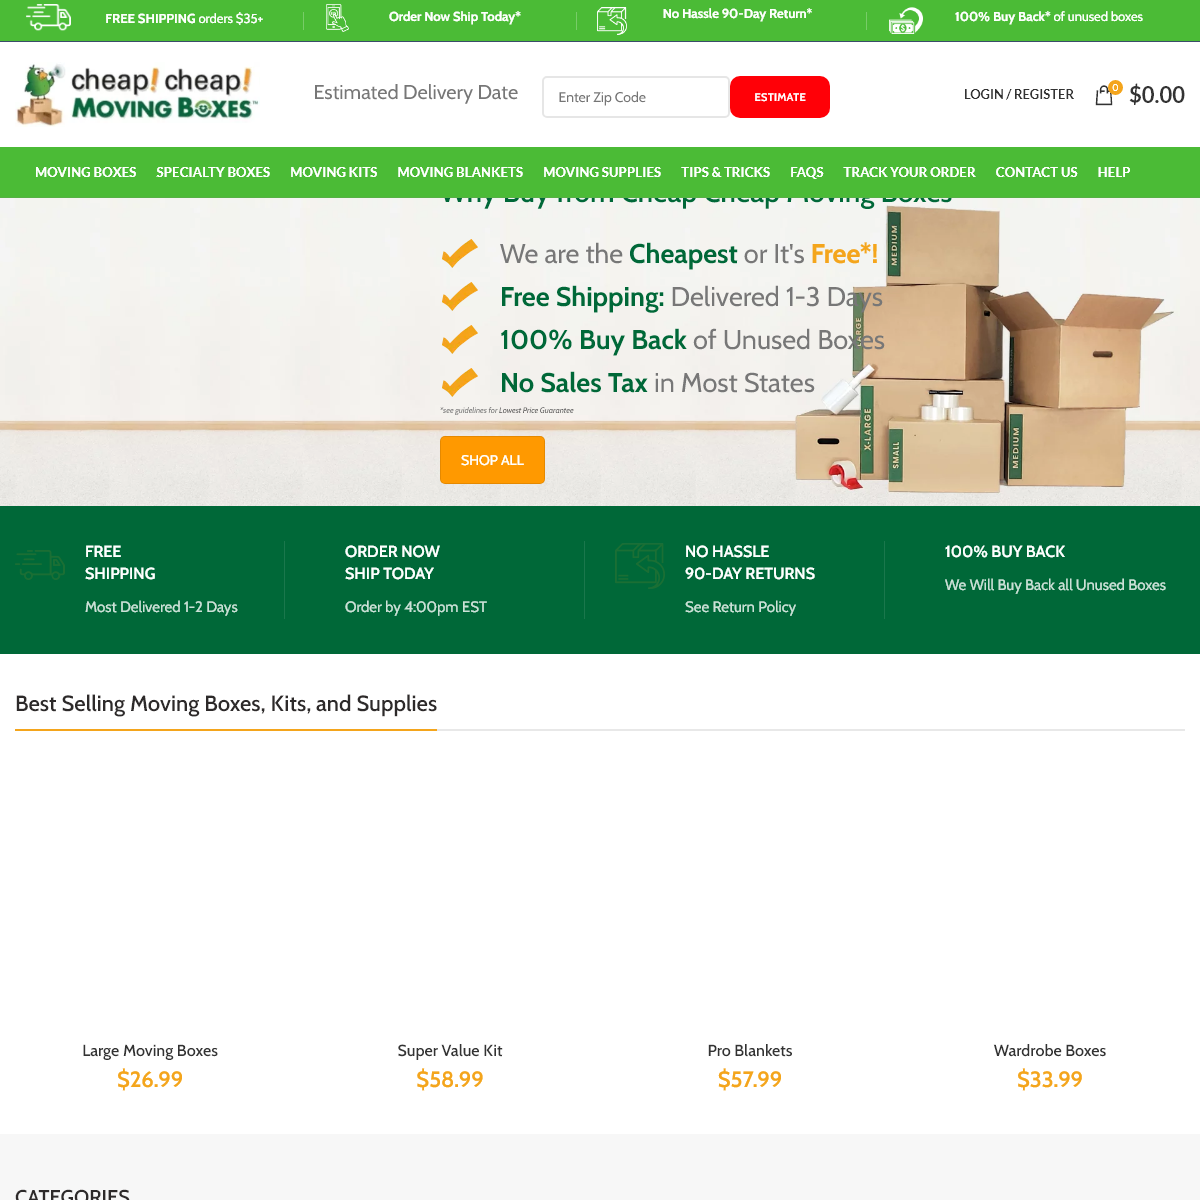 A complete backup of cheapcheapmovingboxes.com